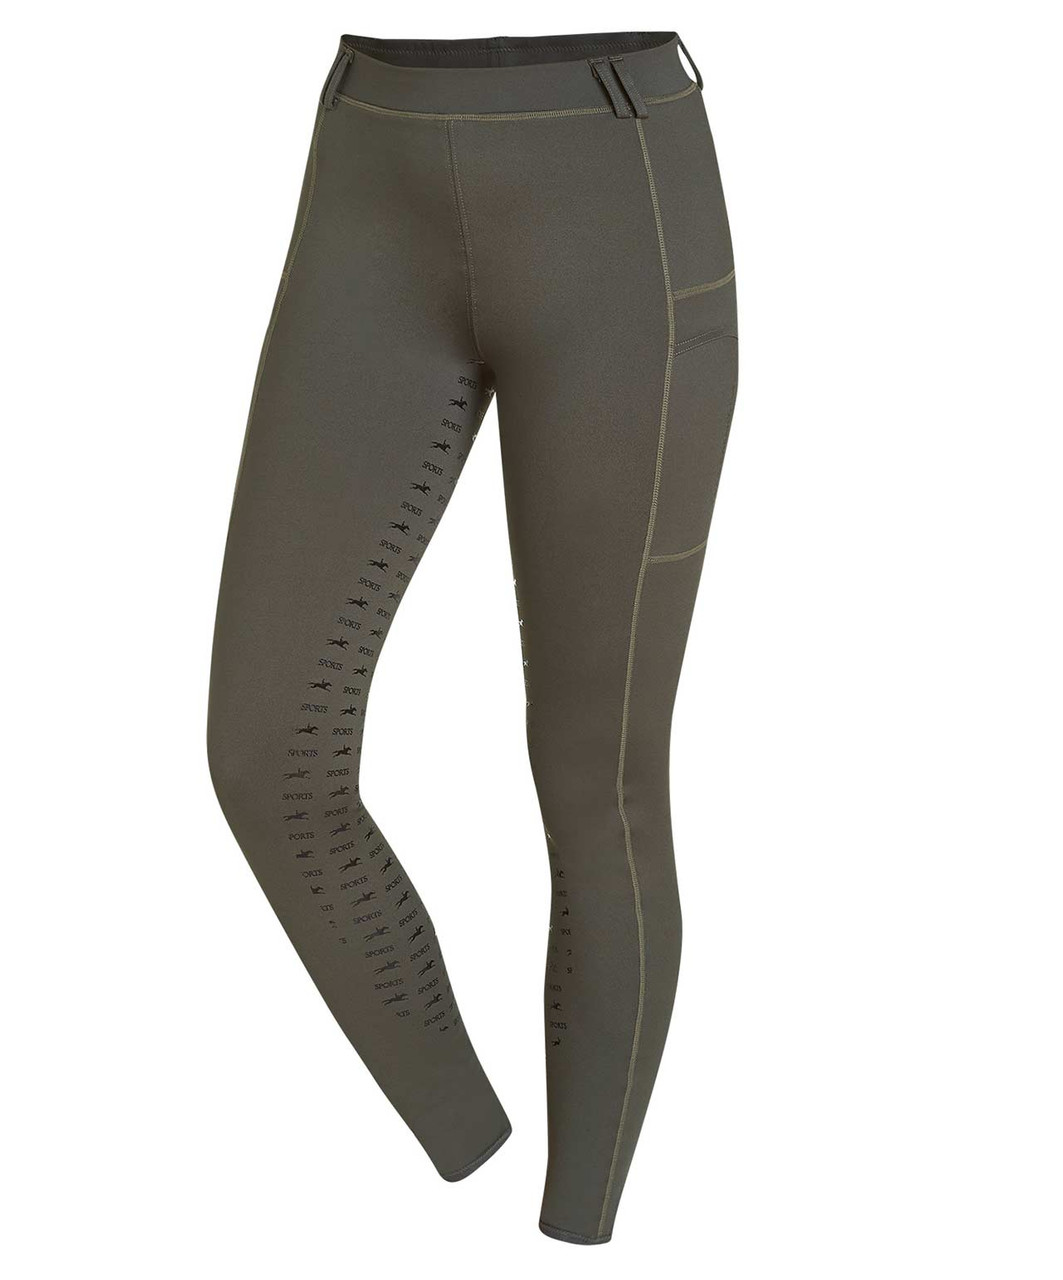 Schockemohle New Pocket Riding Tights 2022 - Sprucewood Tack